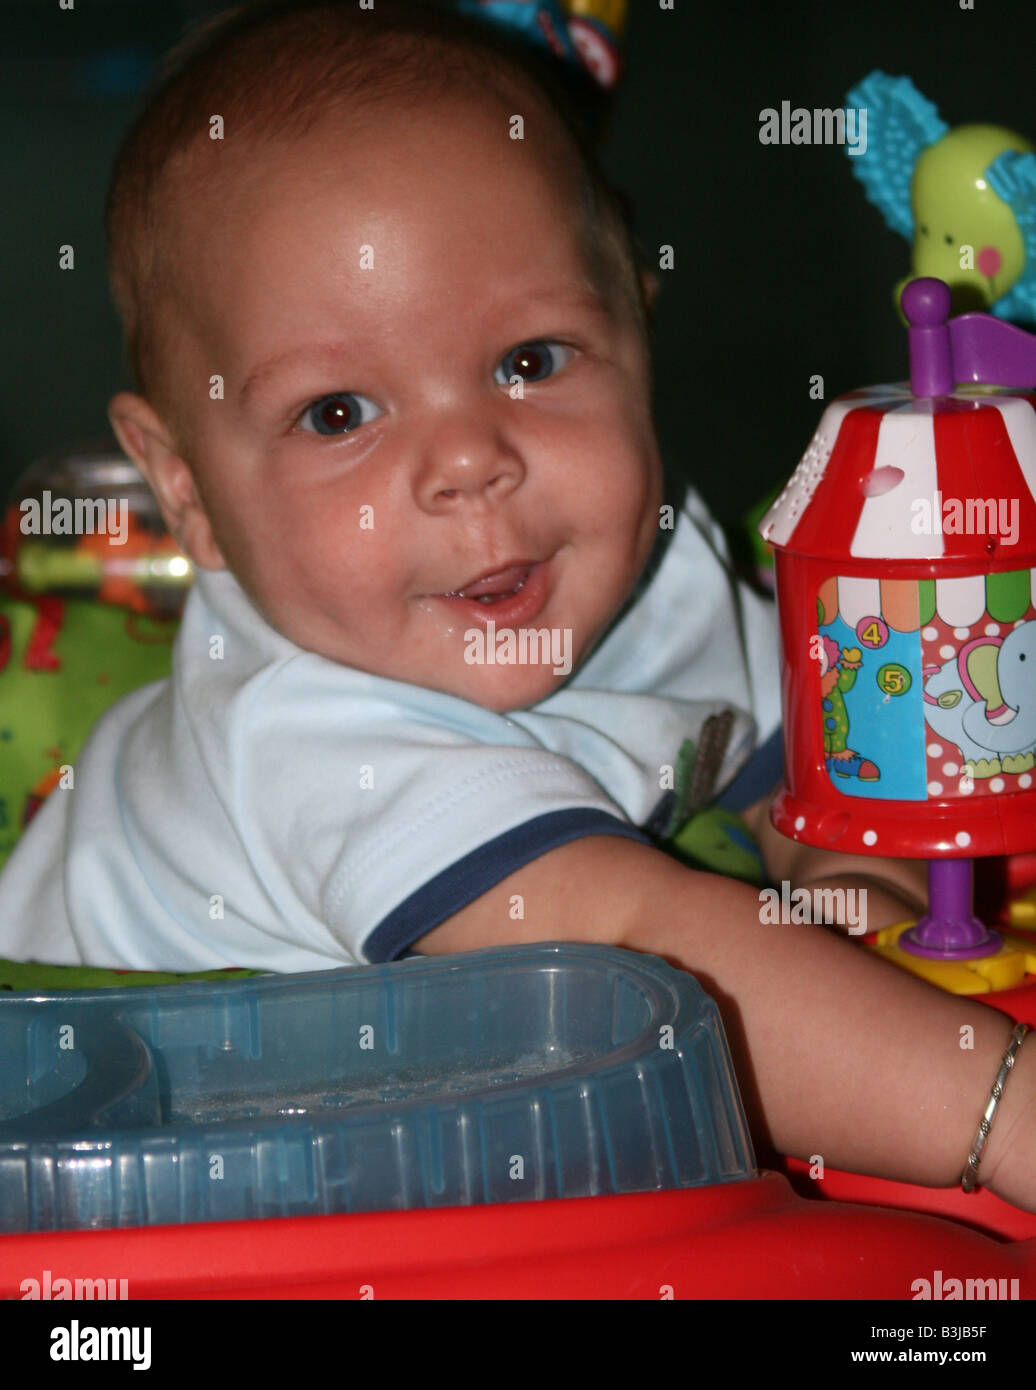 Baby boy playing in baby toy Banque D'Images